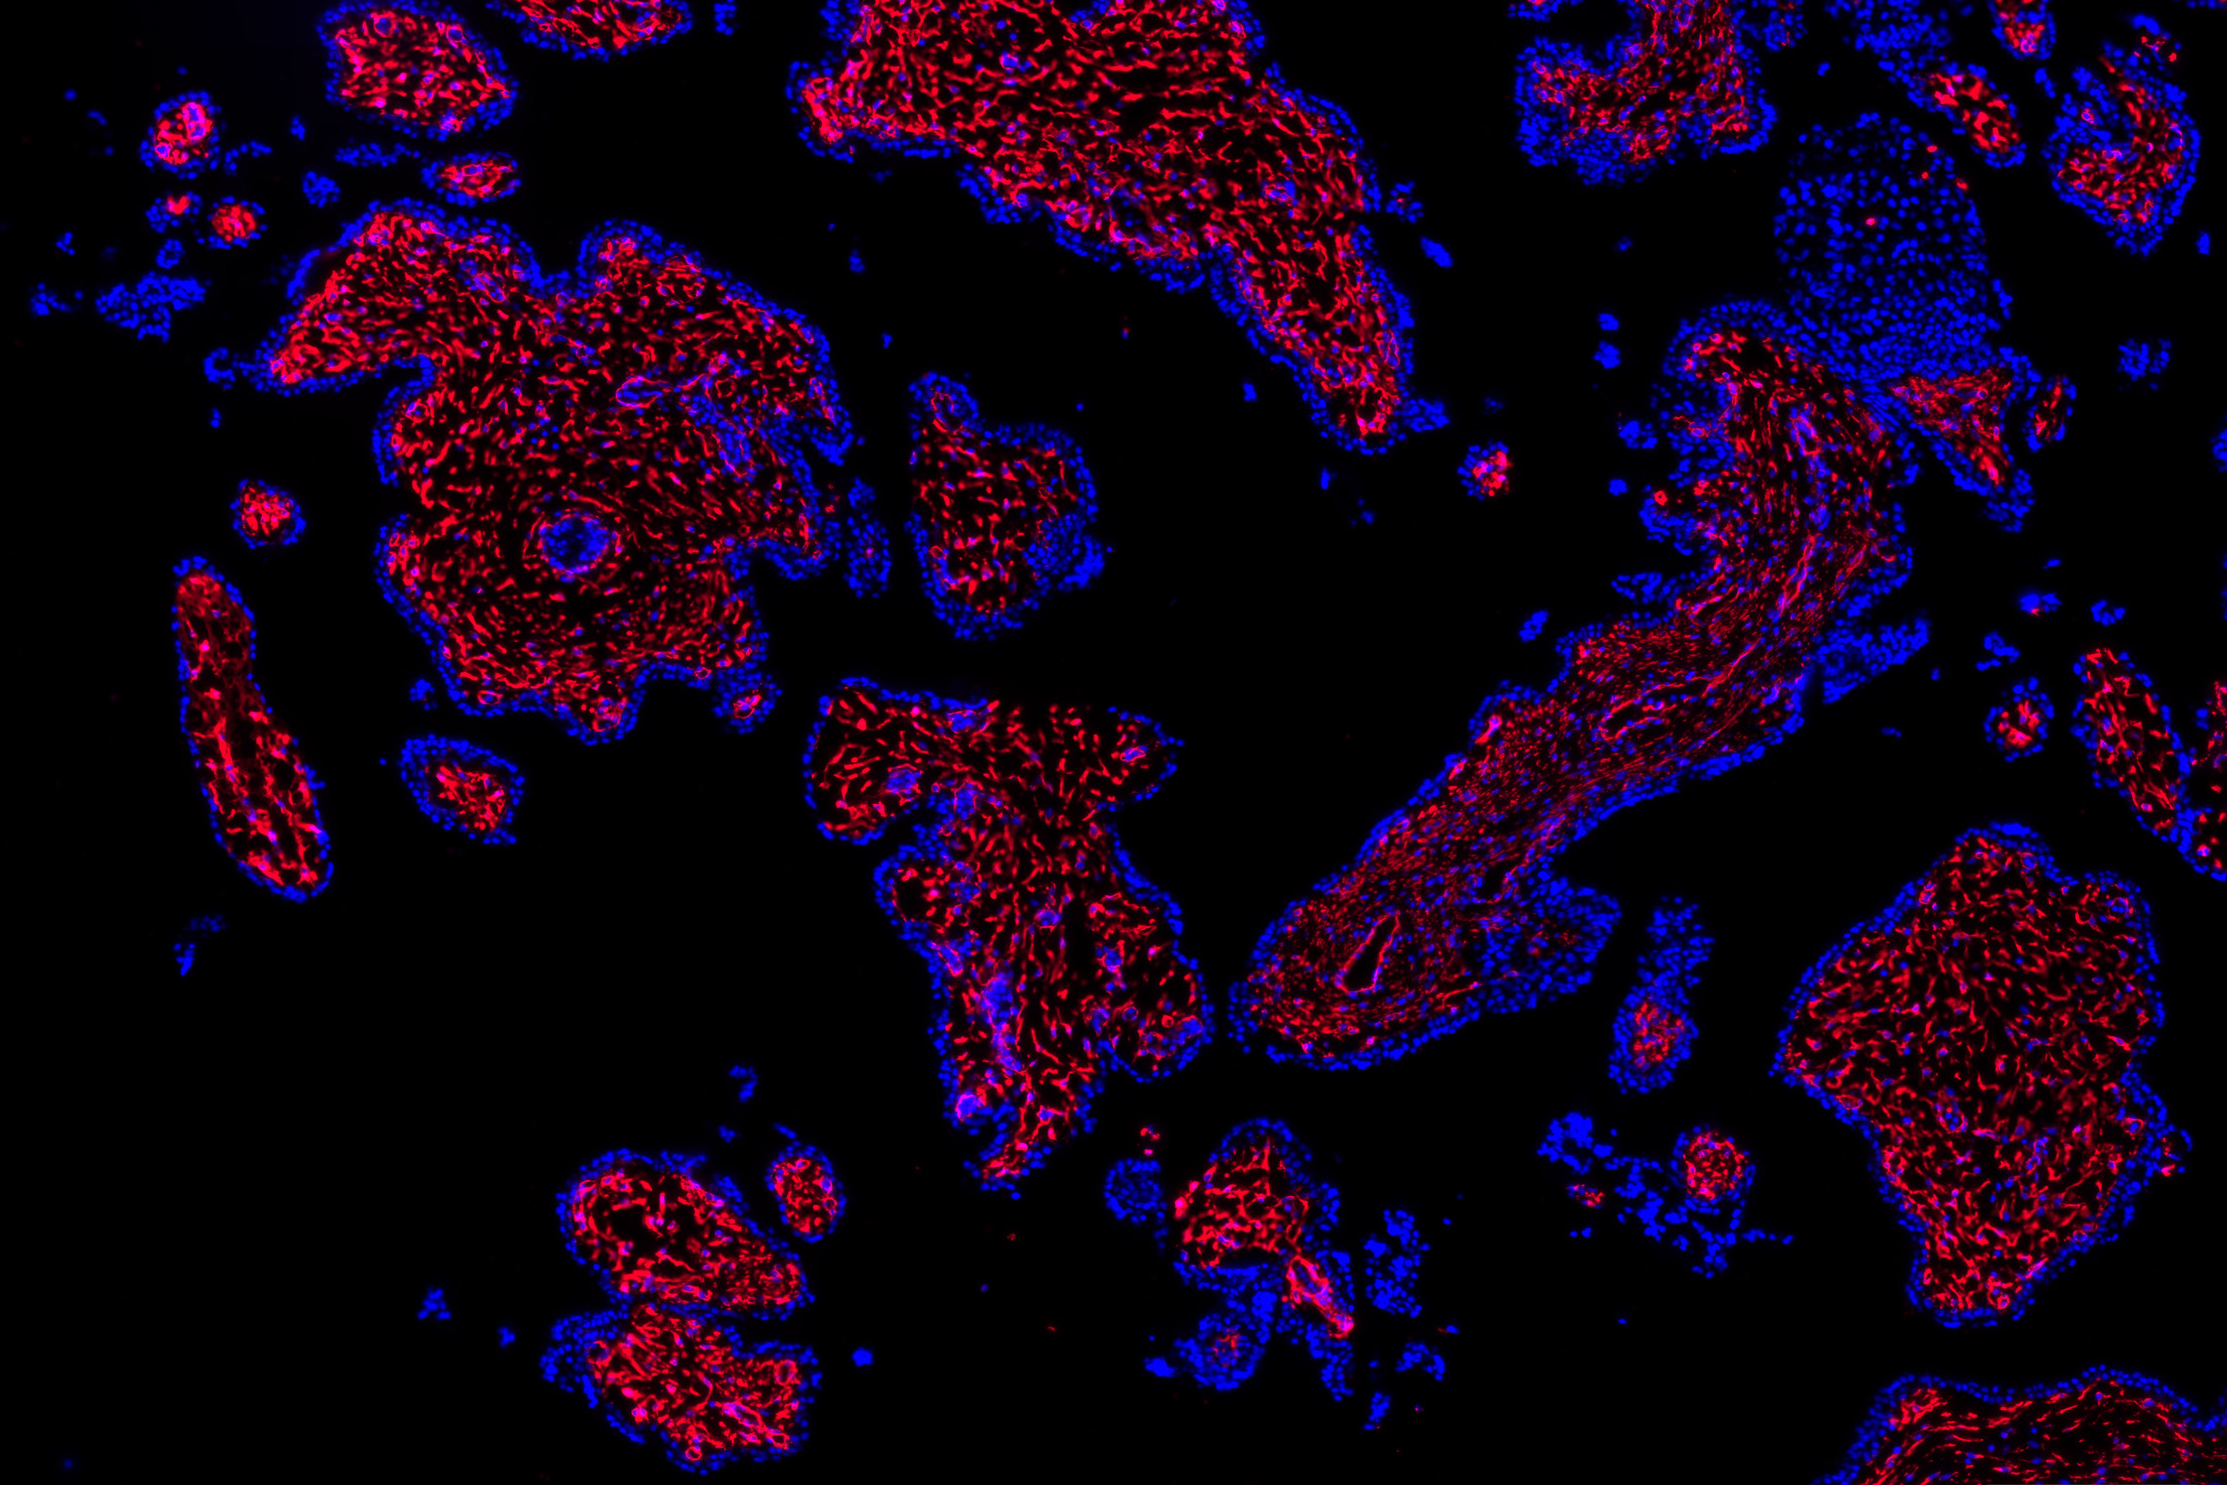 Researchers have mapped more than 20 different cell types present in the first-trimester human placenta, including stromal and endothelial cells (red).